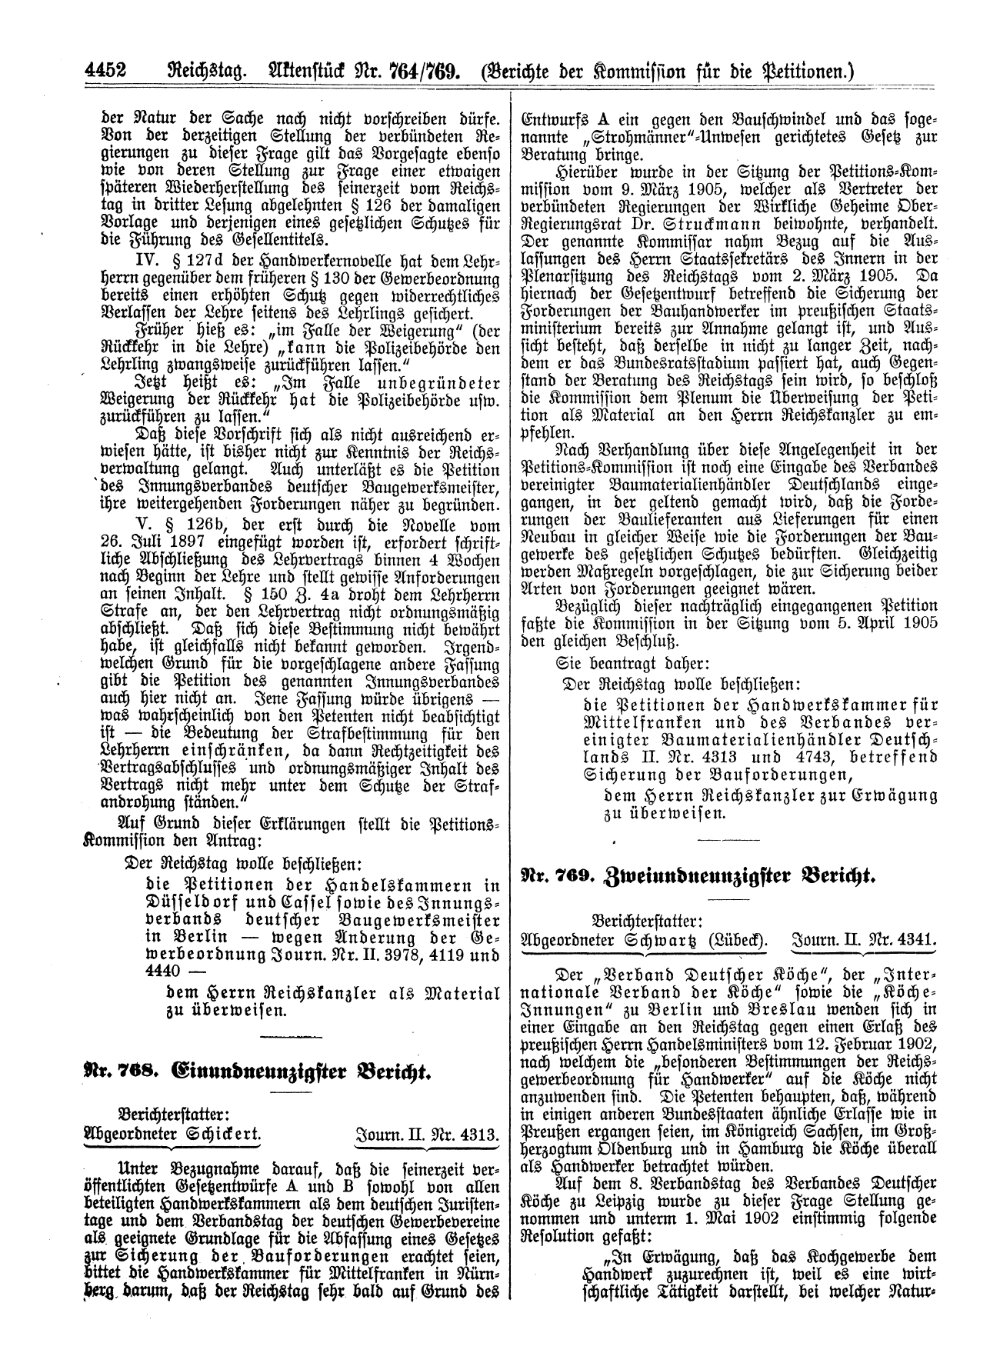 Scan of page 4452